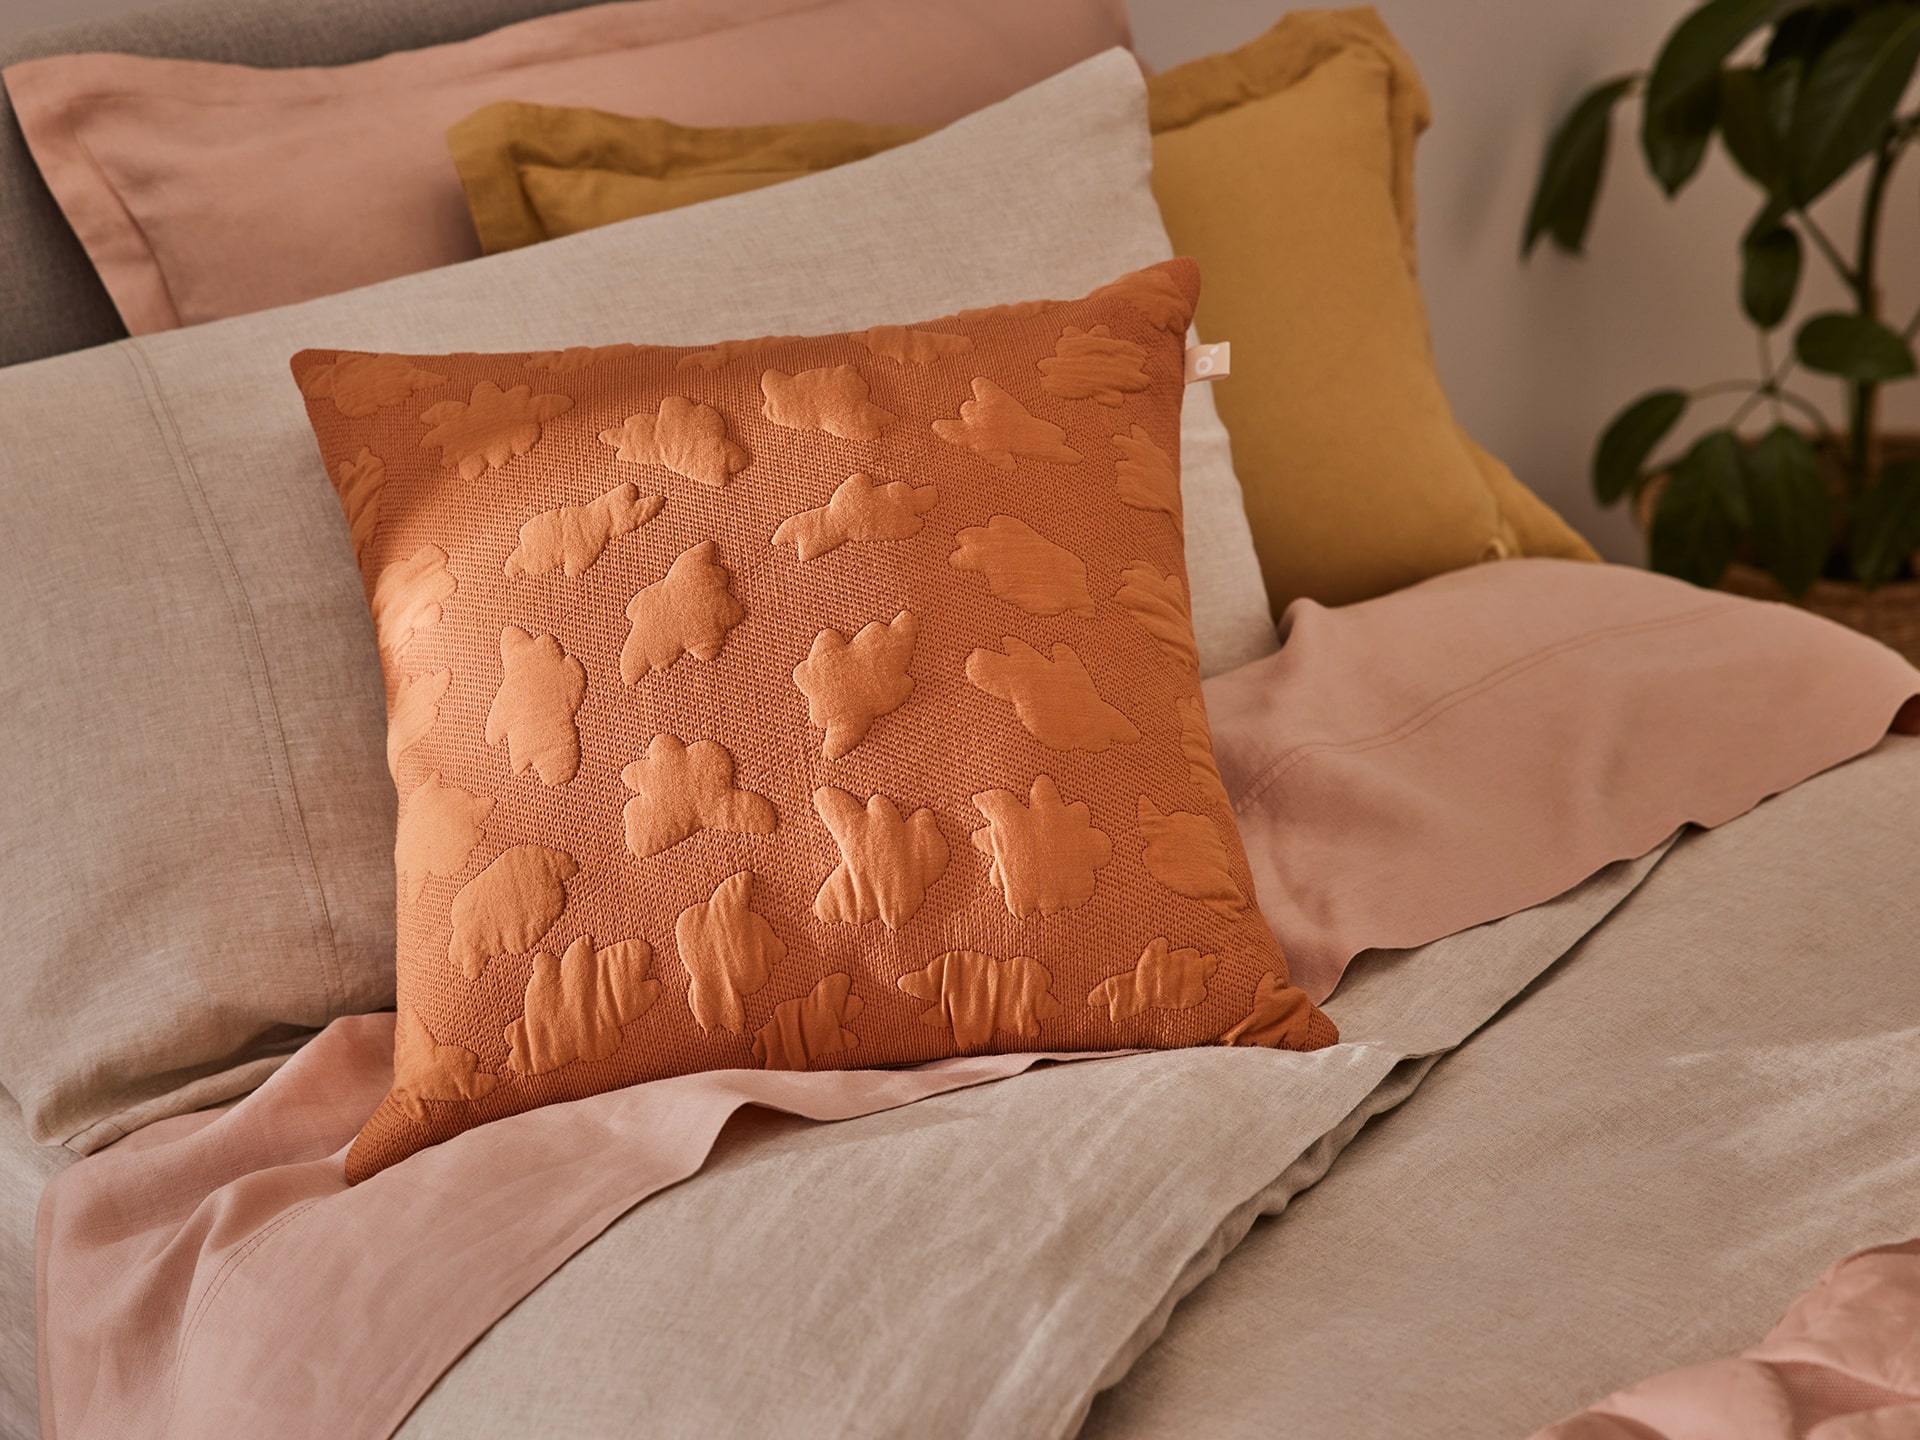 A mid-century modern bed featuring warm-toned bedding and a dark orange cushion from Koala